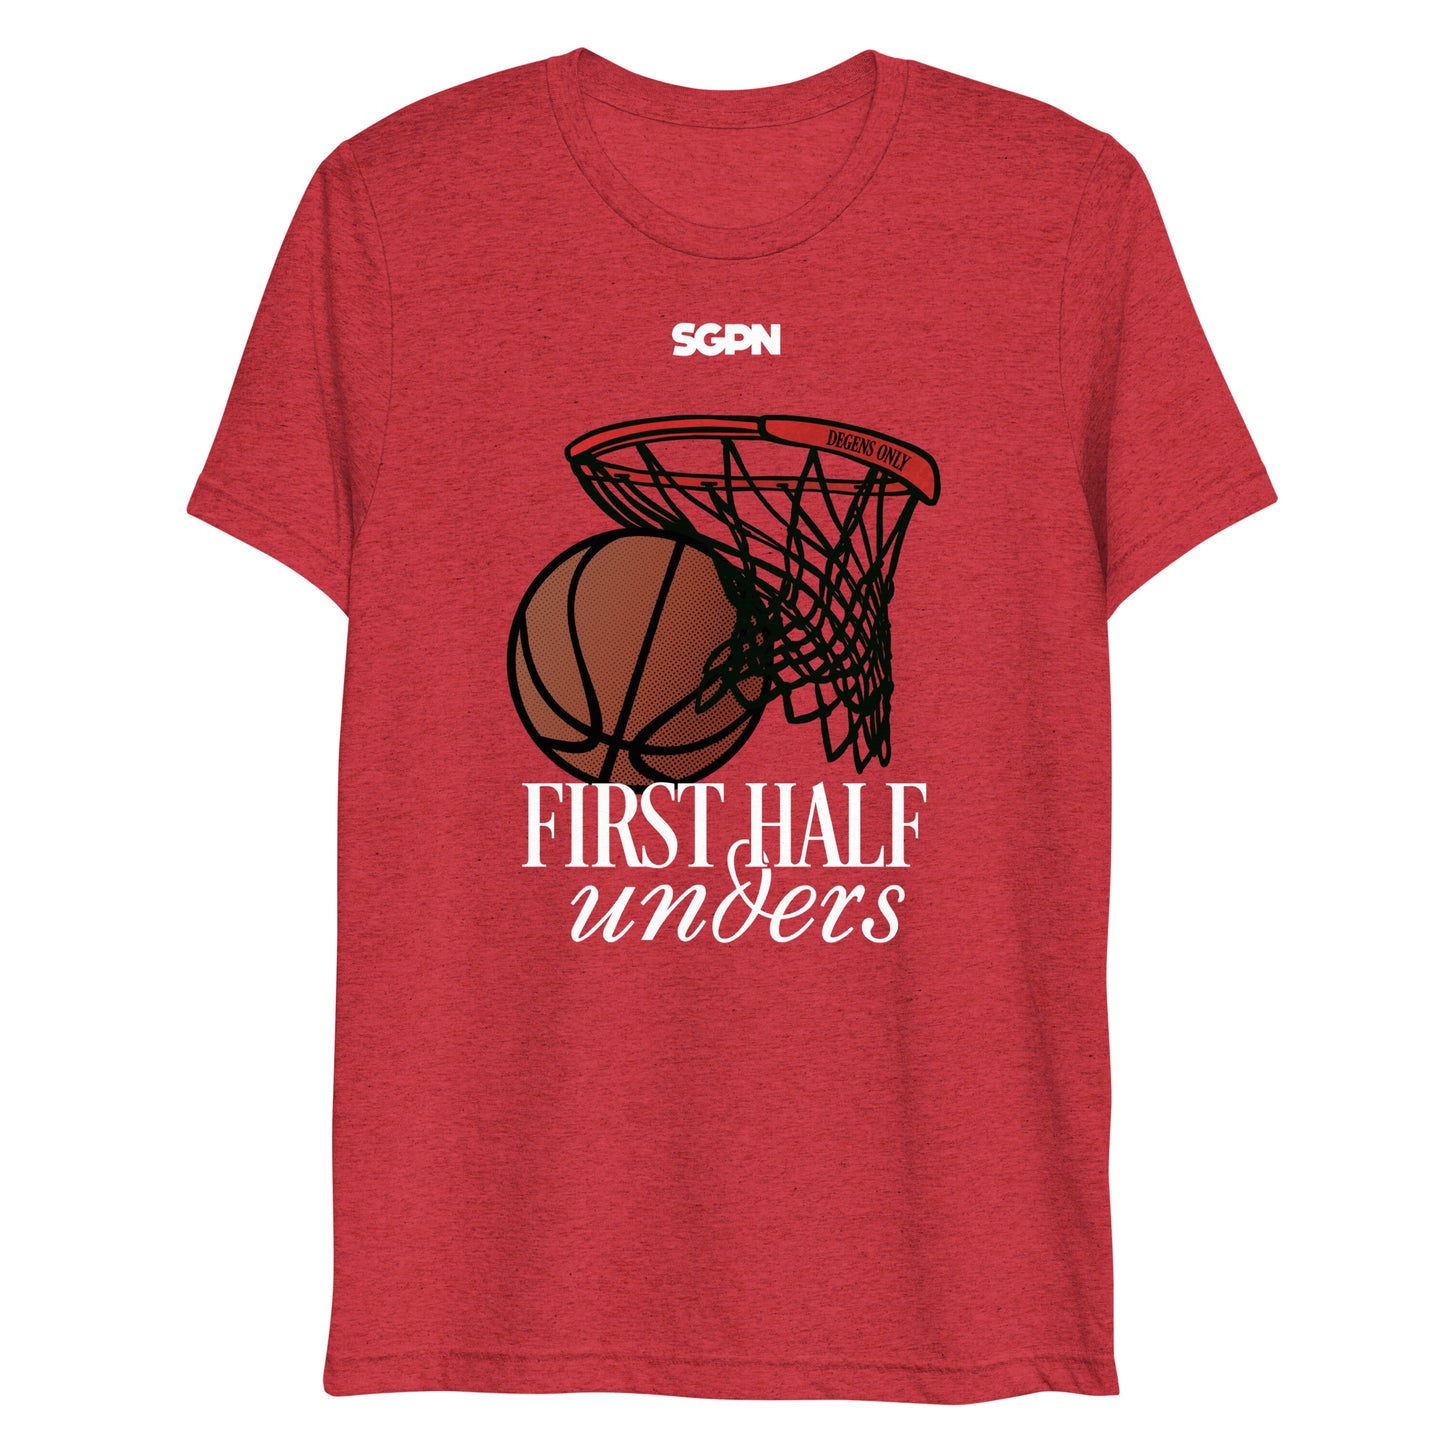 First Half Unders - Campus Tour edition - Short sleeve t-shirt